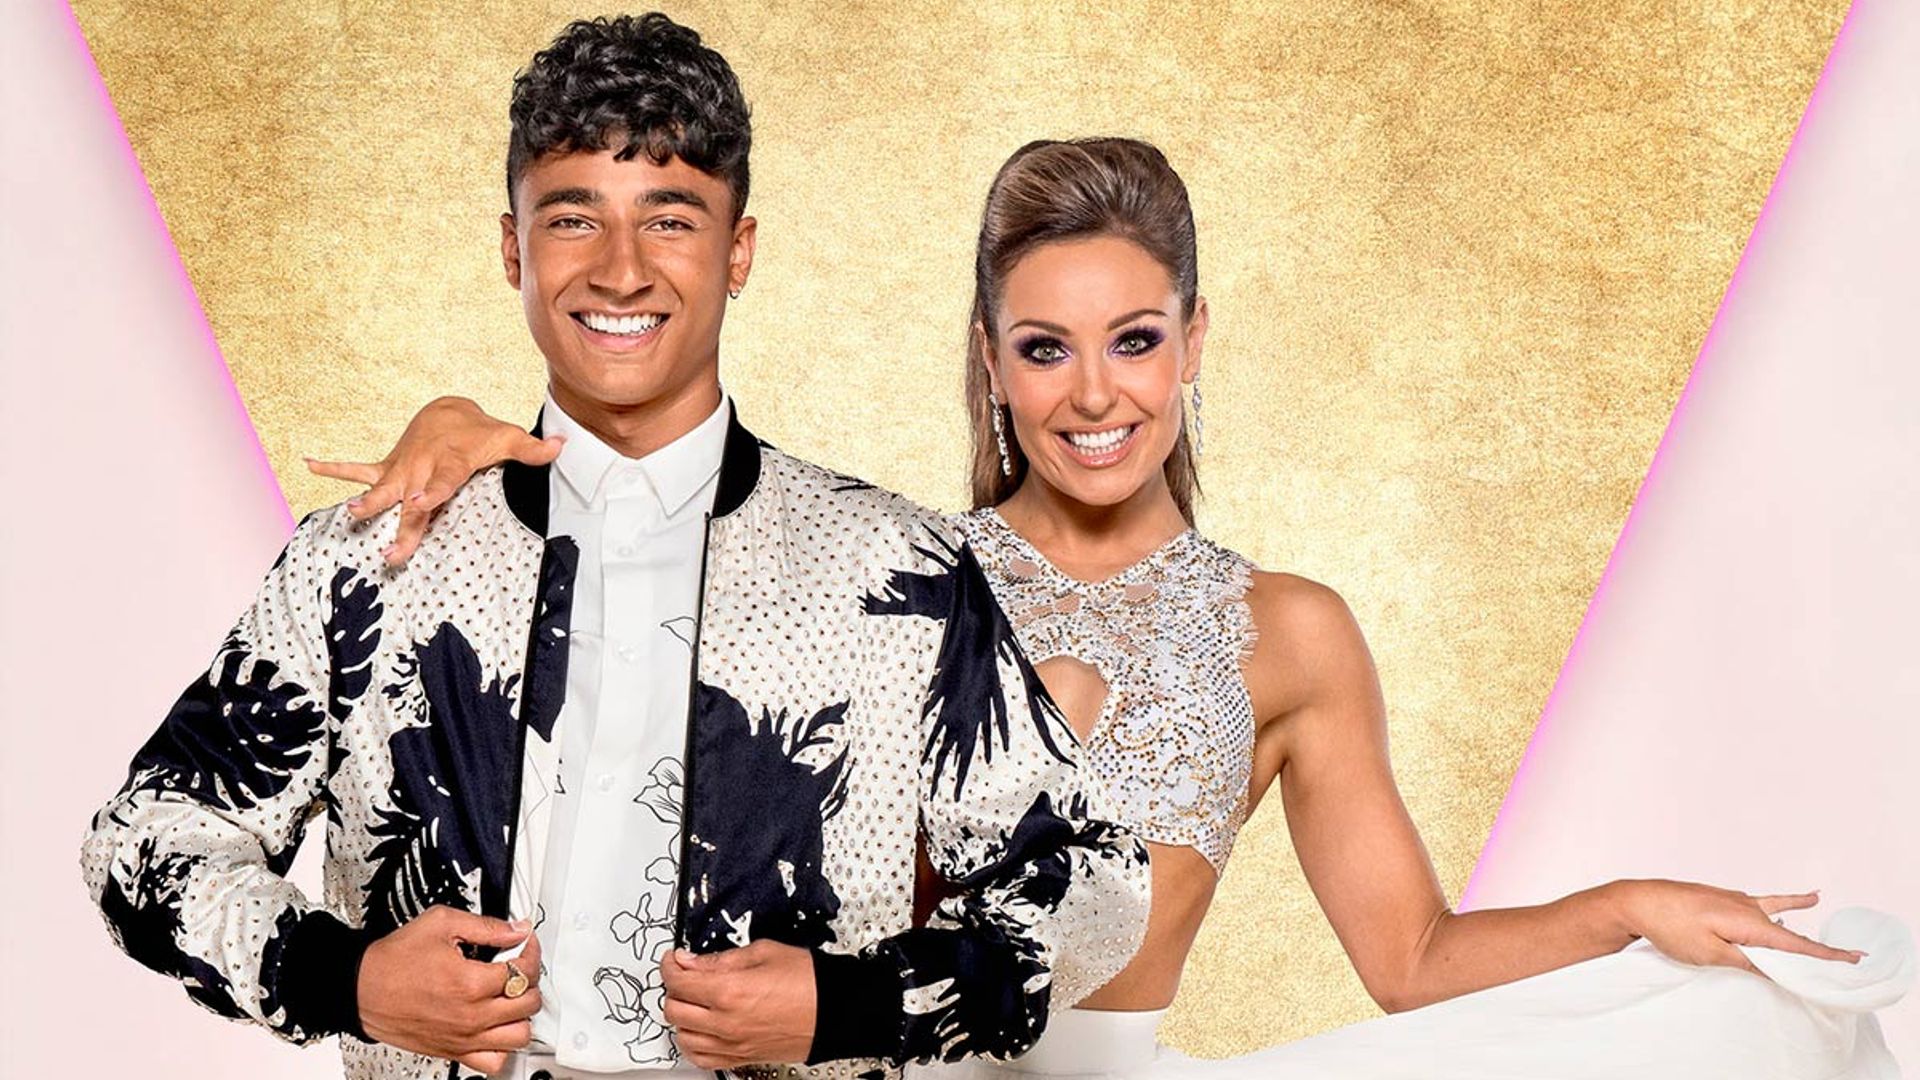 Who is Strictly's Karim Zeroual dating? His secret girlfriend revealed